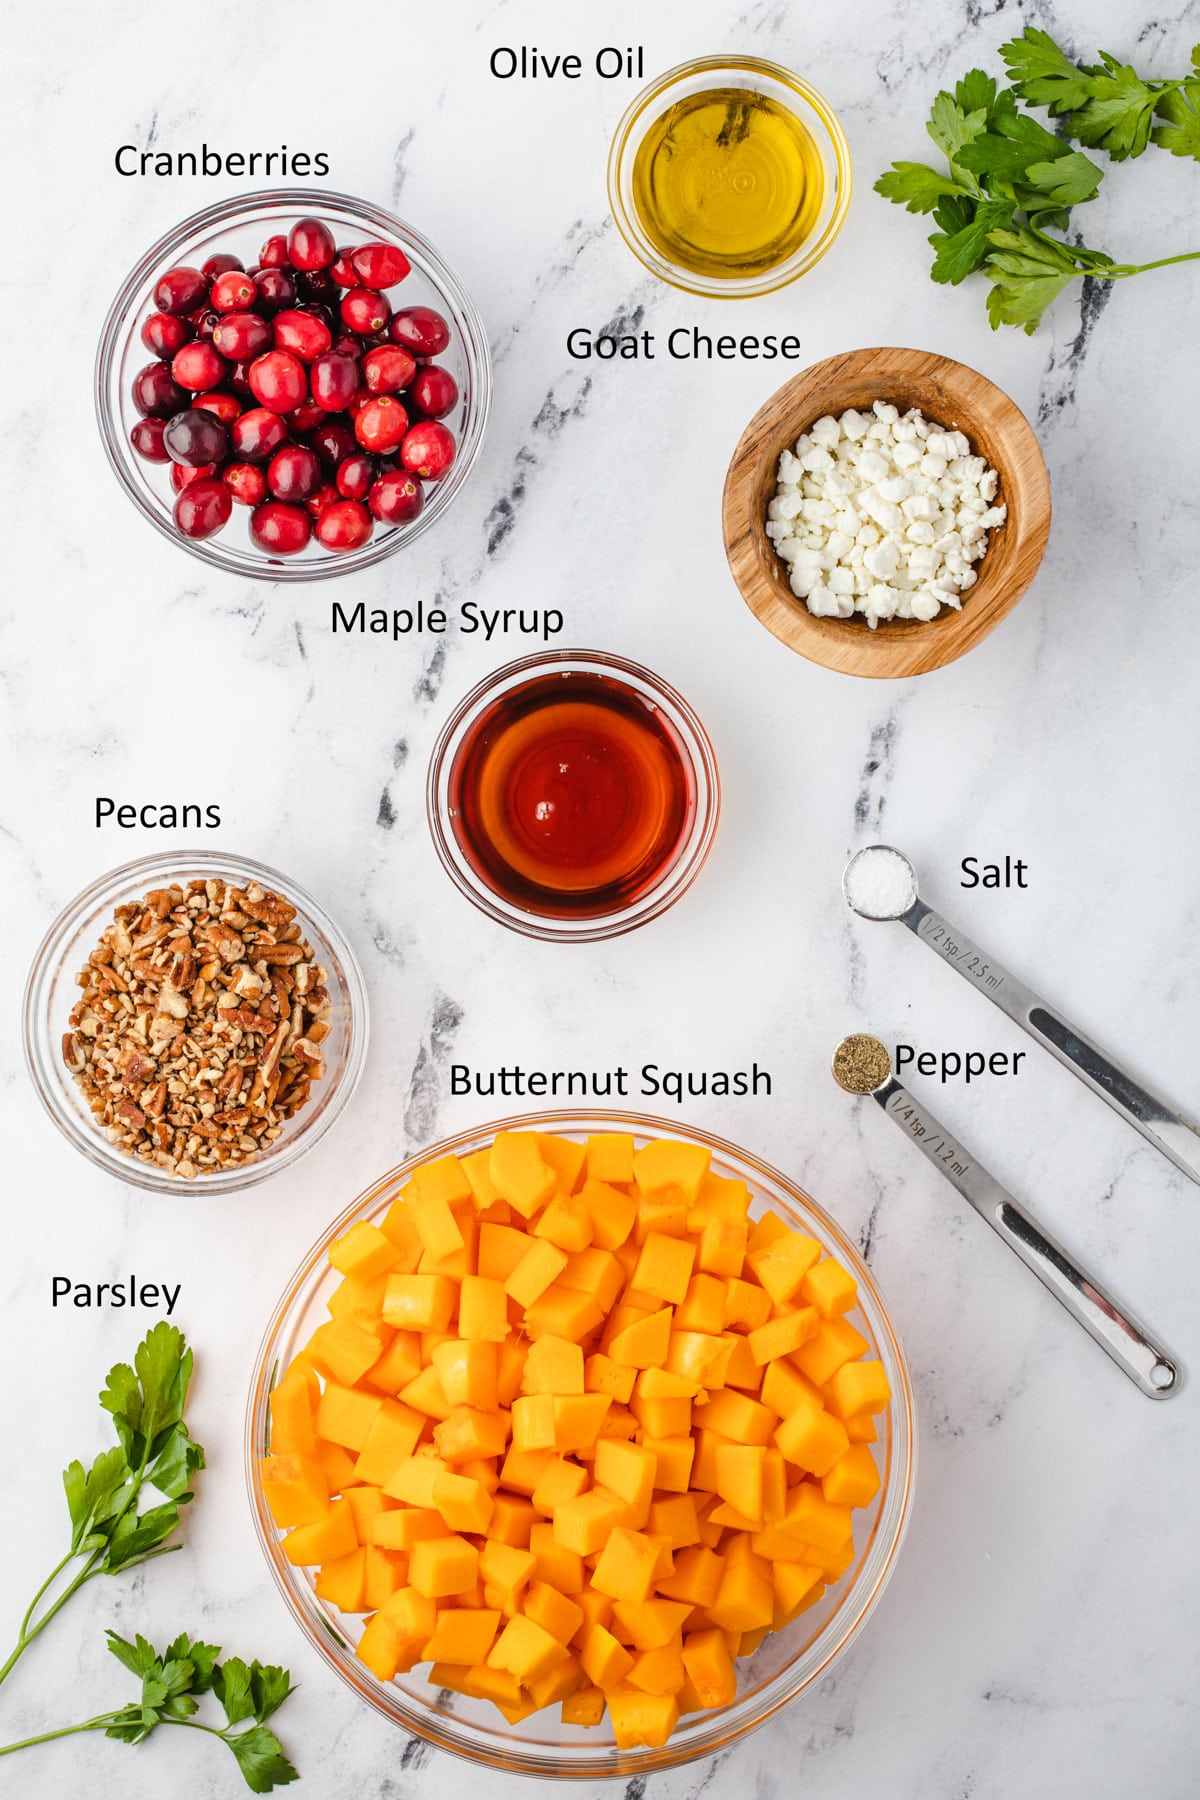 Overhead of labeled ingredients for this Thanksgiving recipe.